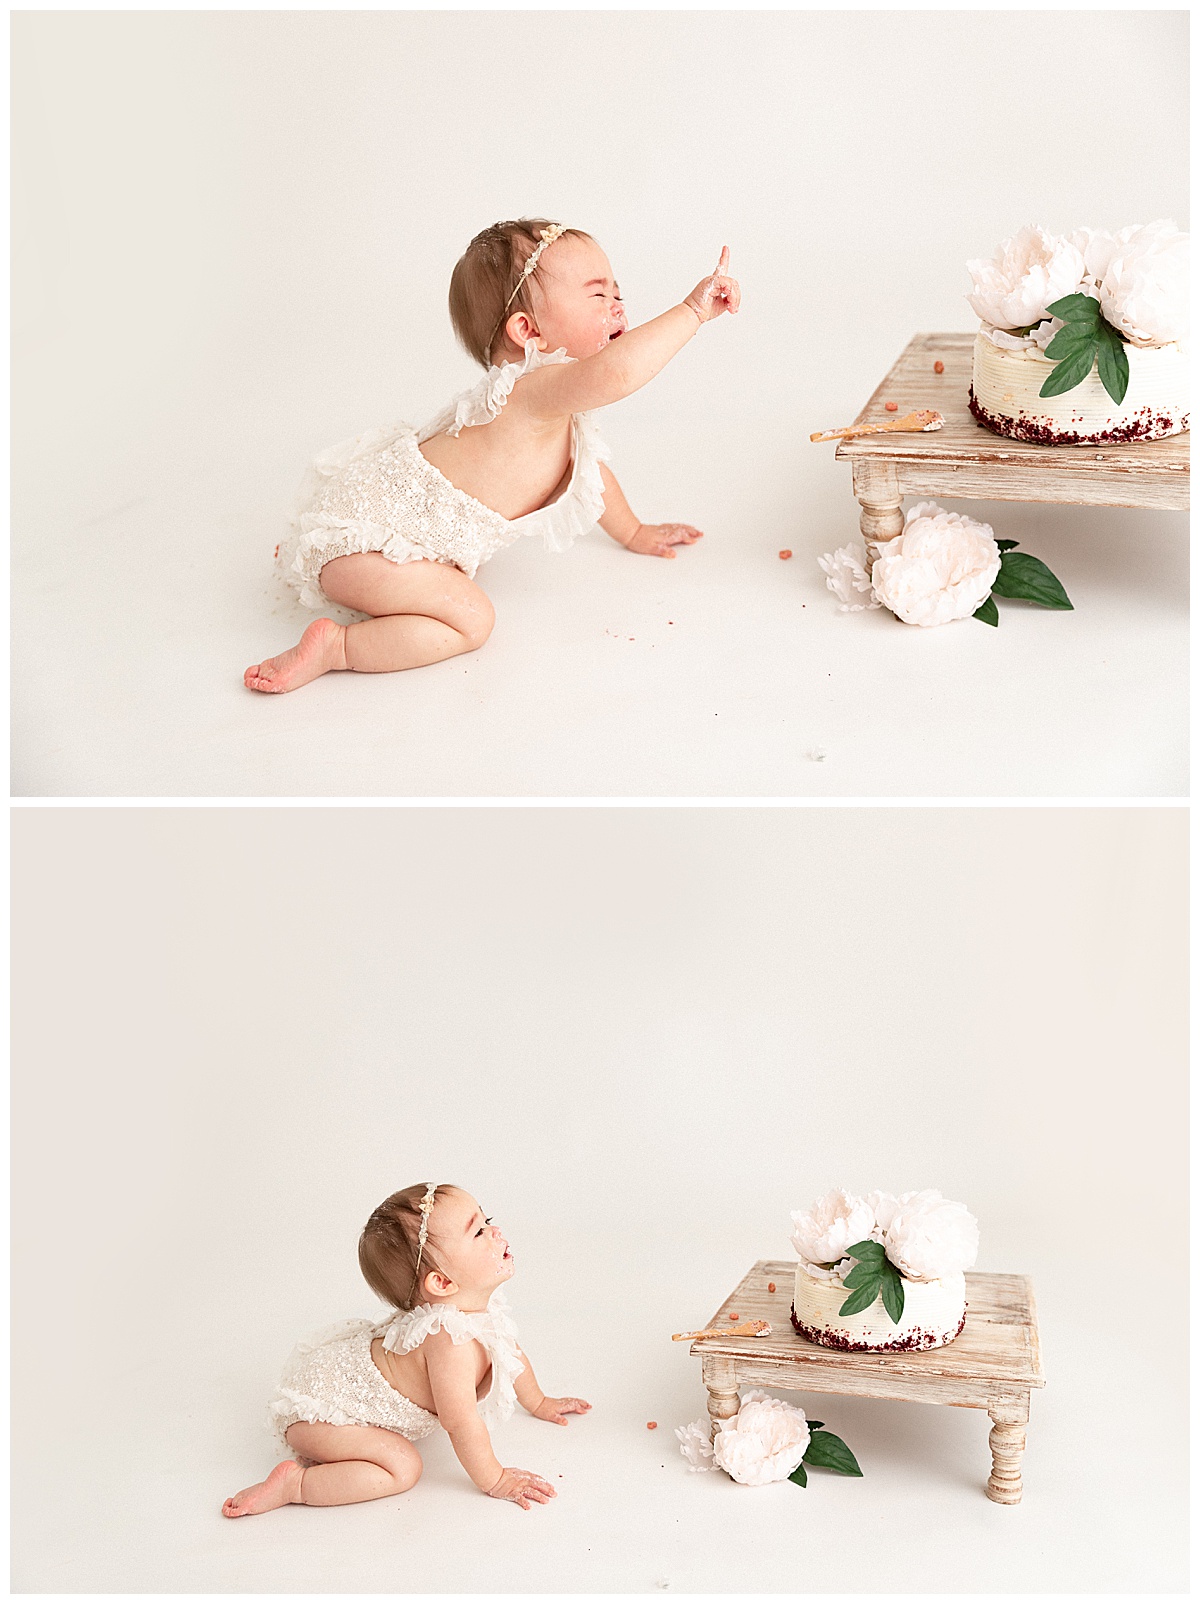 Little on reaching for cake by Washington DC Baby Photographer